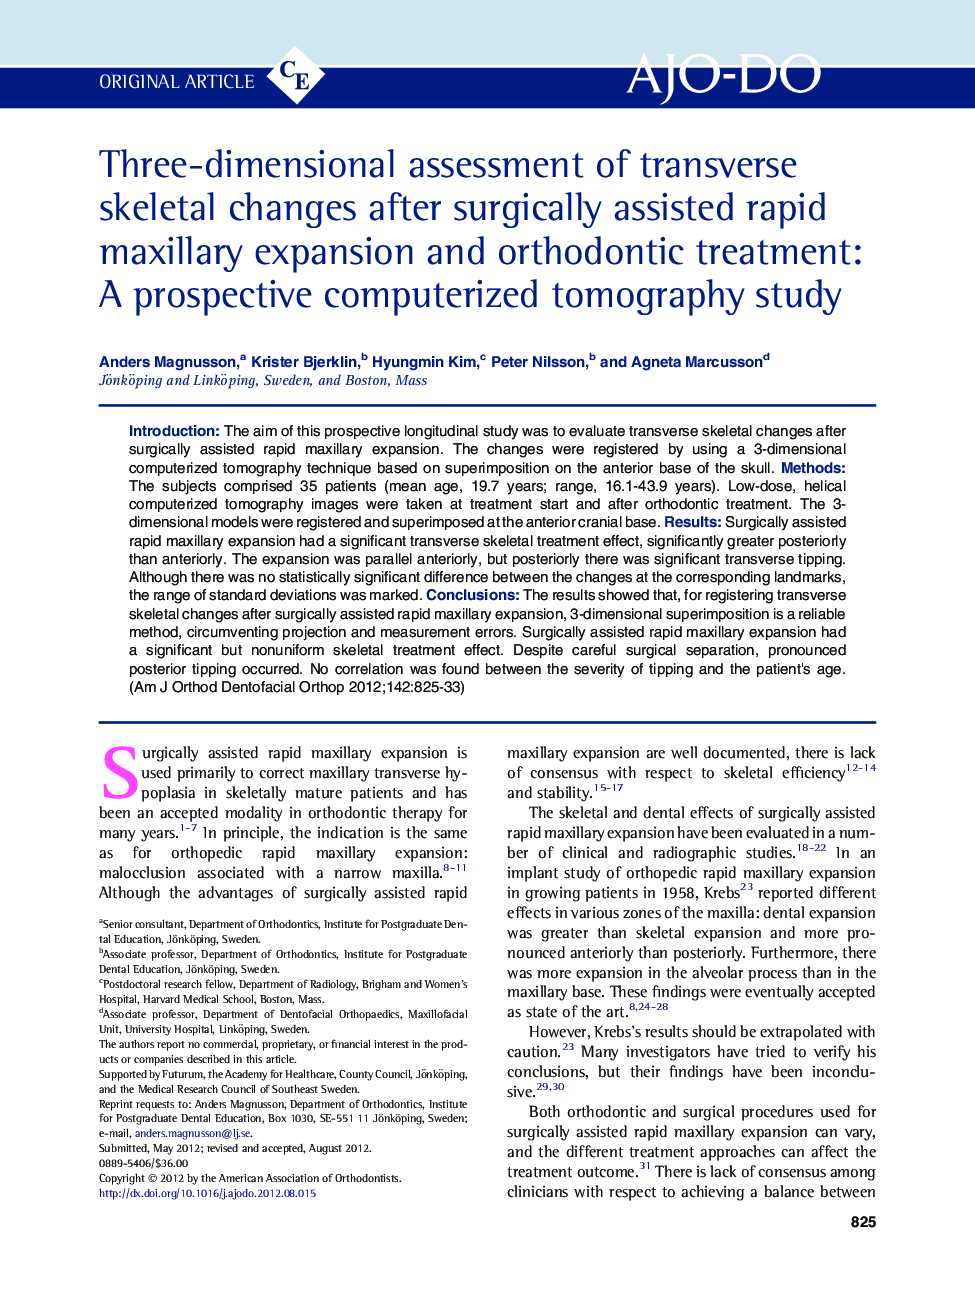 Three-dimensional assessment of transverse skeletal changes after surgically assisted rapid maxillary expansion and orthodontic treatment: A prospective computerized tomography study 